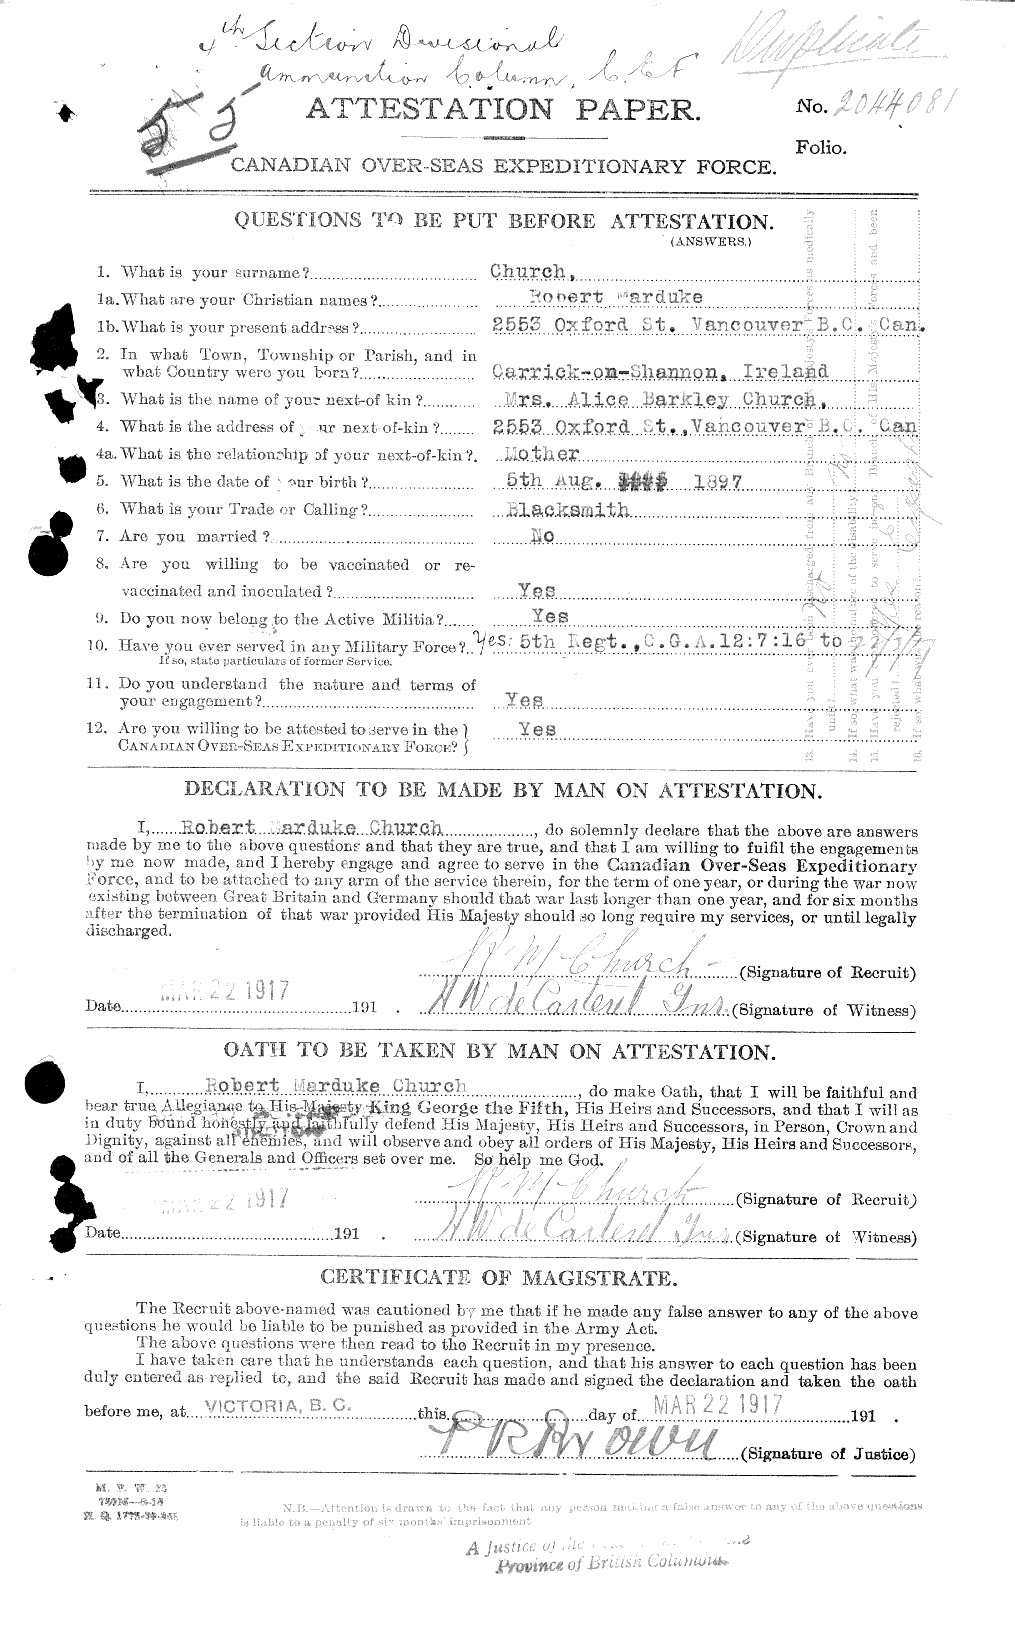 Personnel Records of the First World War - CEF 022374a